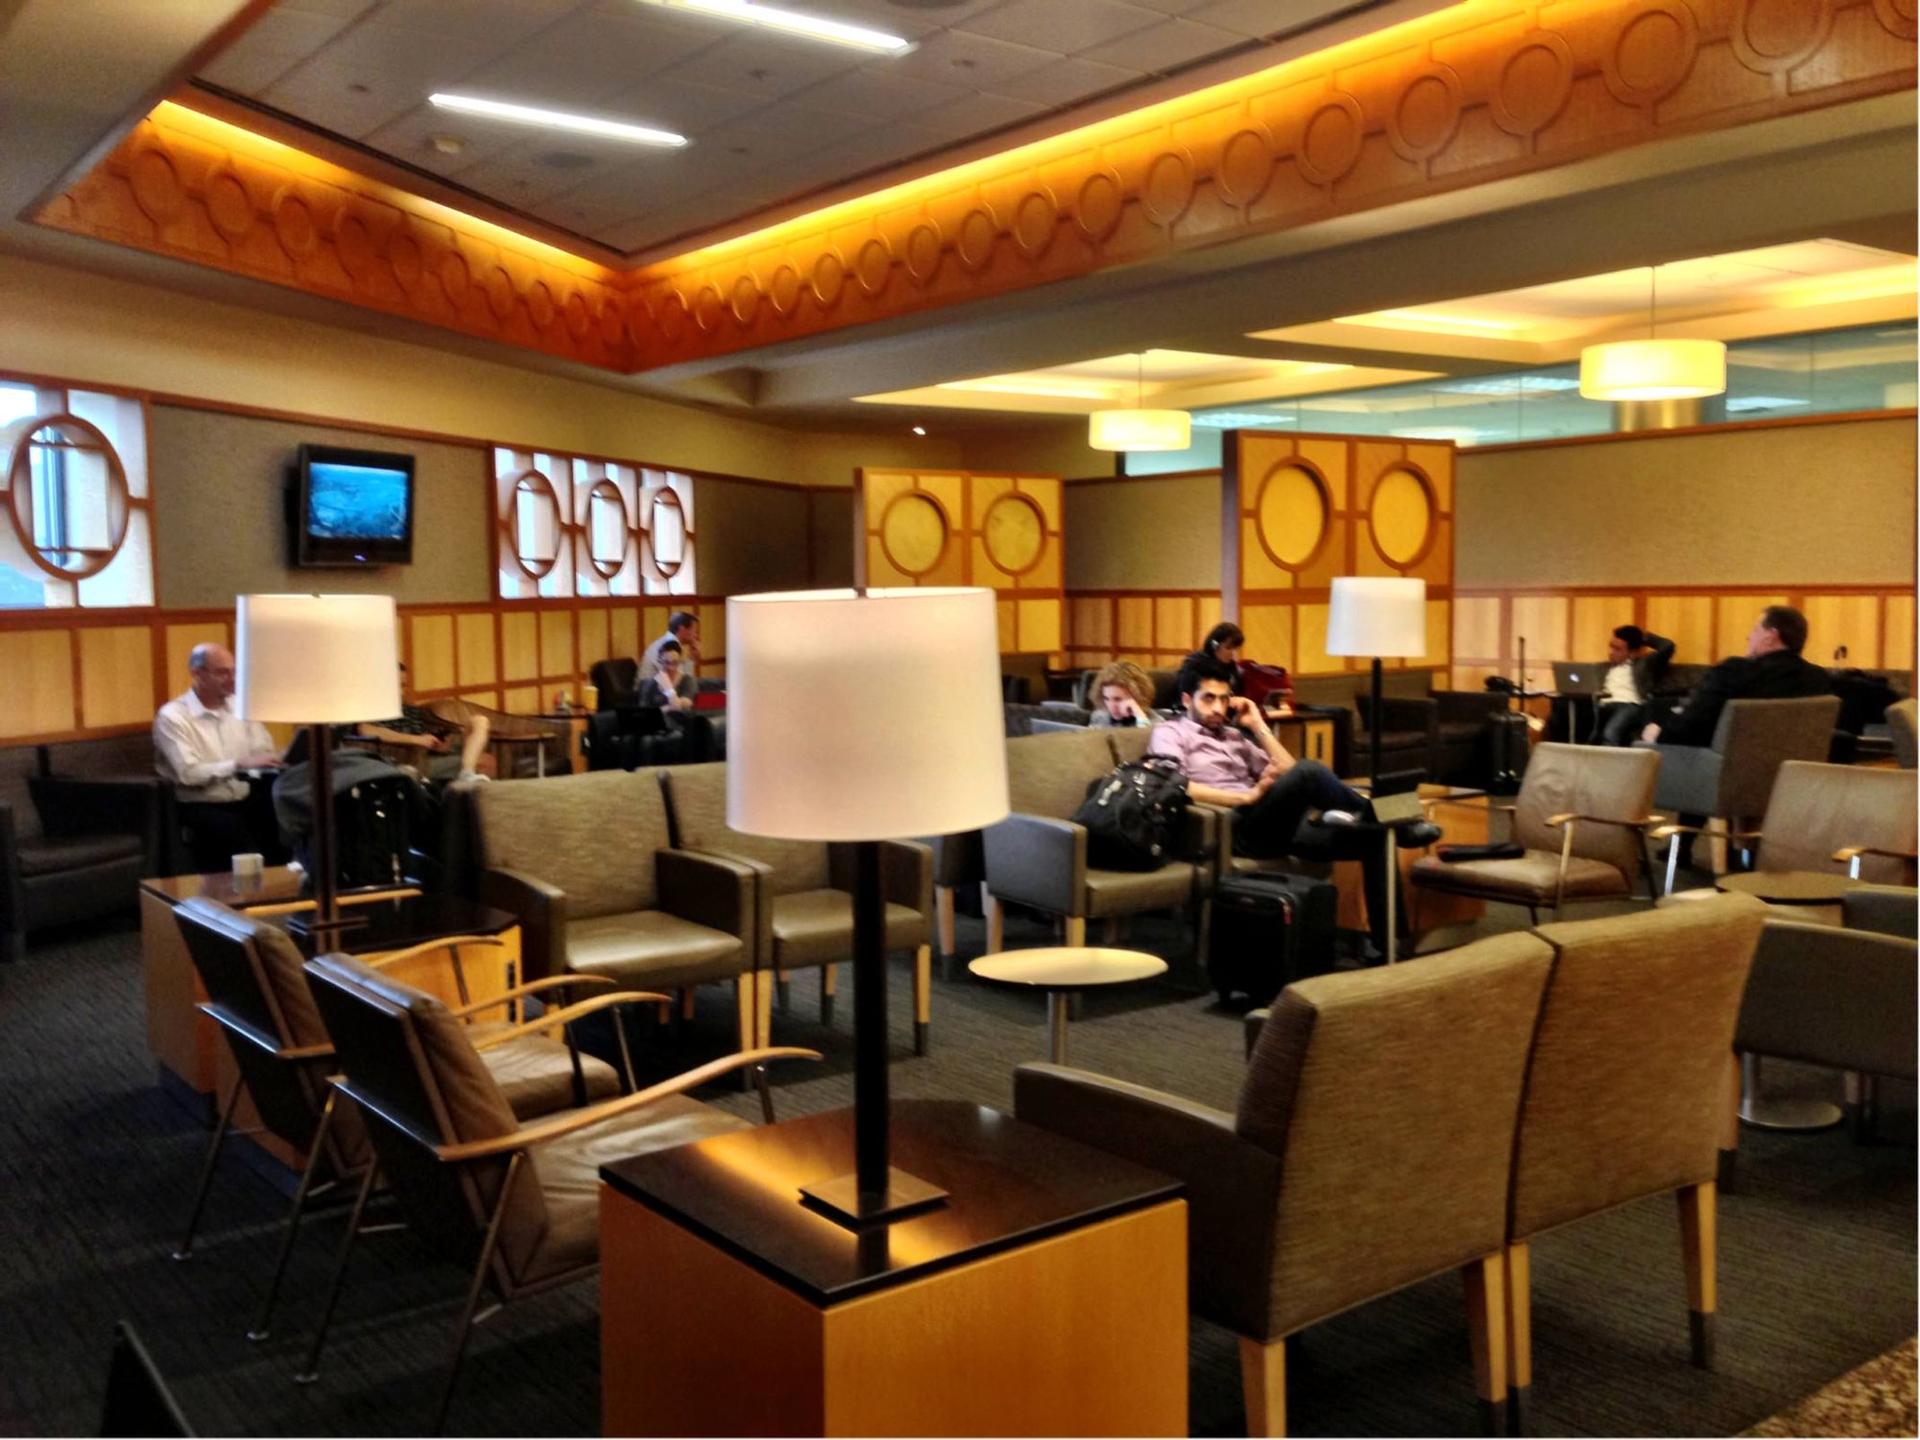 American Airlines Admirals Club image 3 of 7